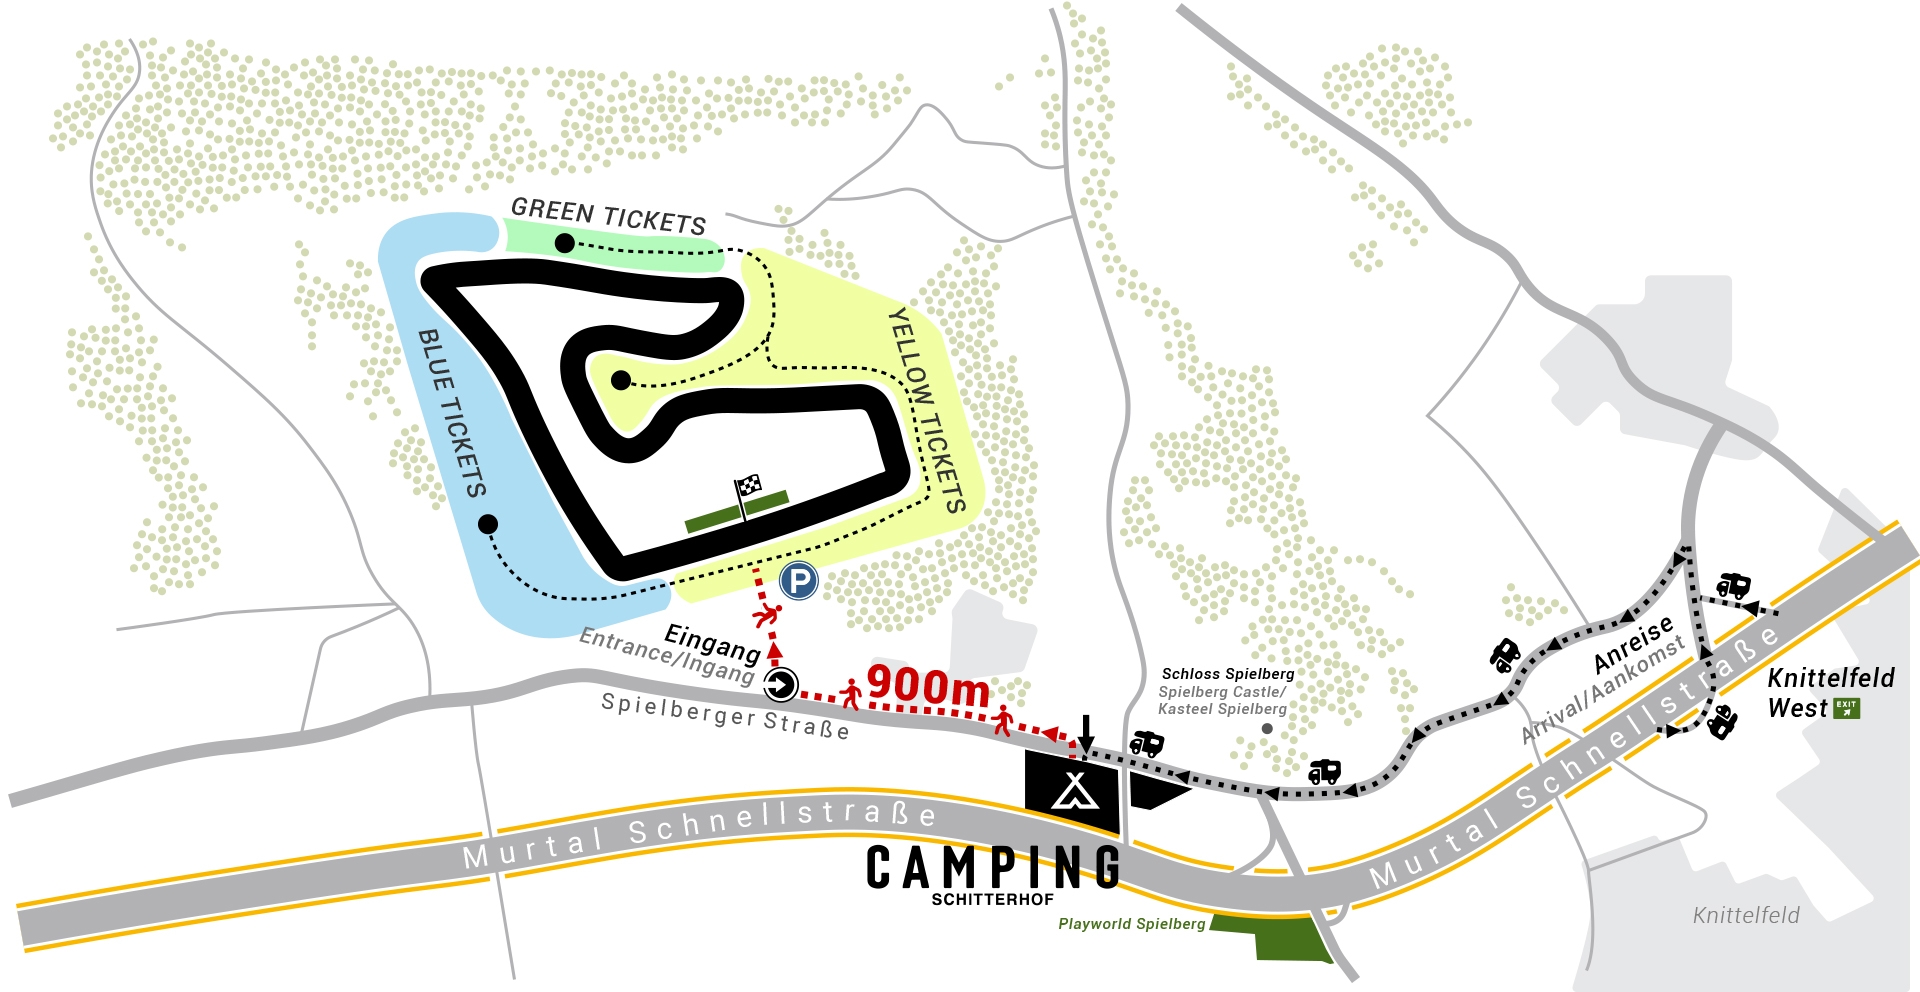 Camping arrival for F1 and MotoGP